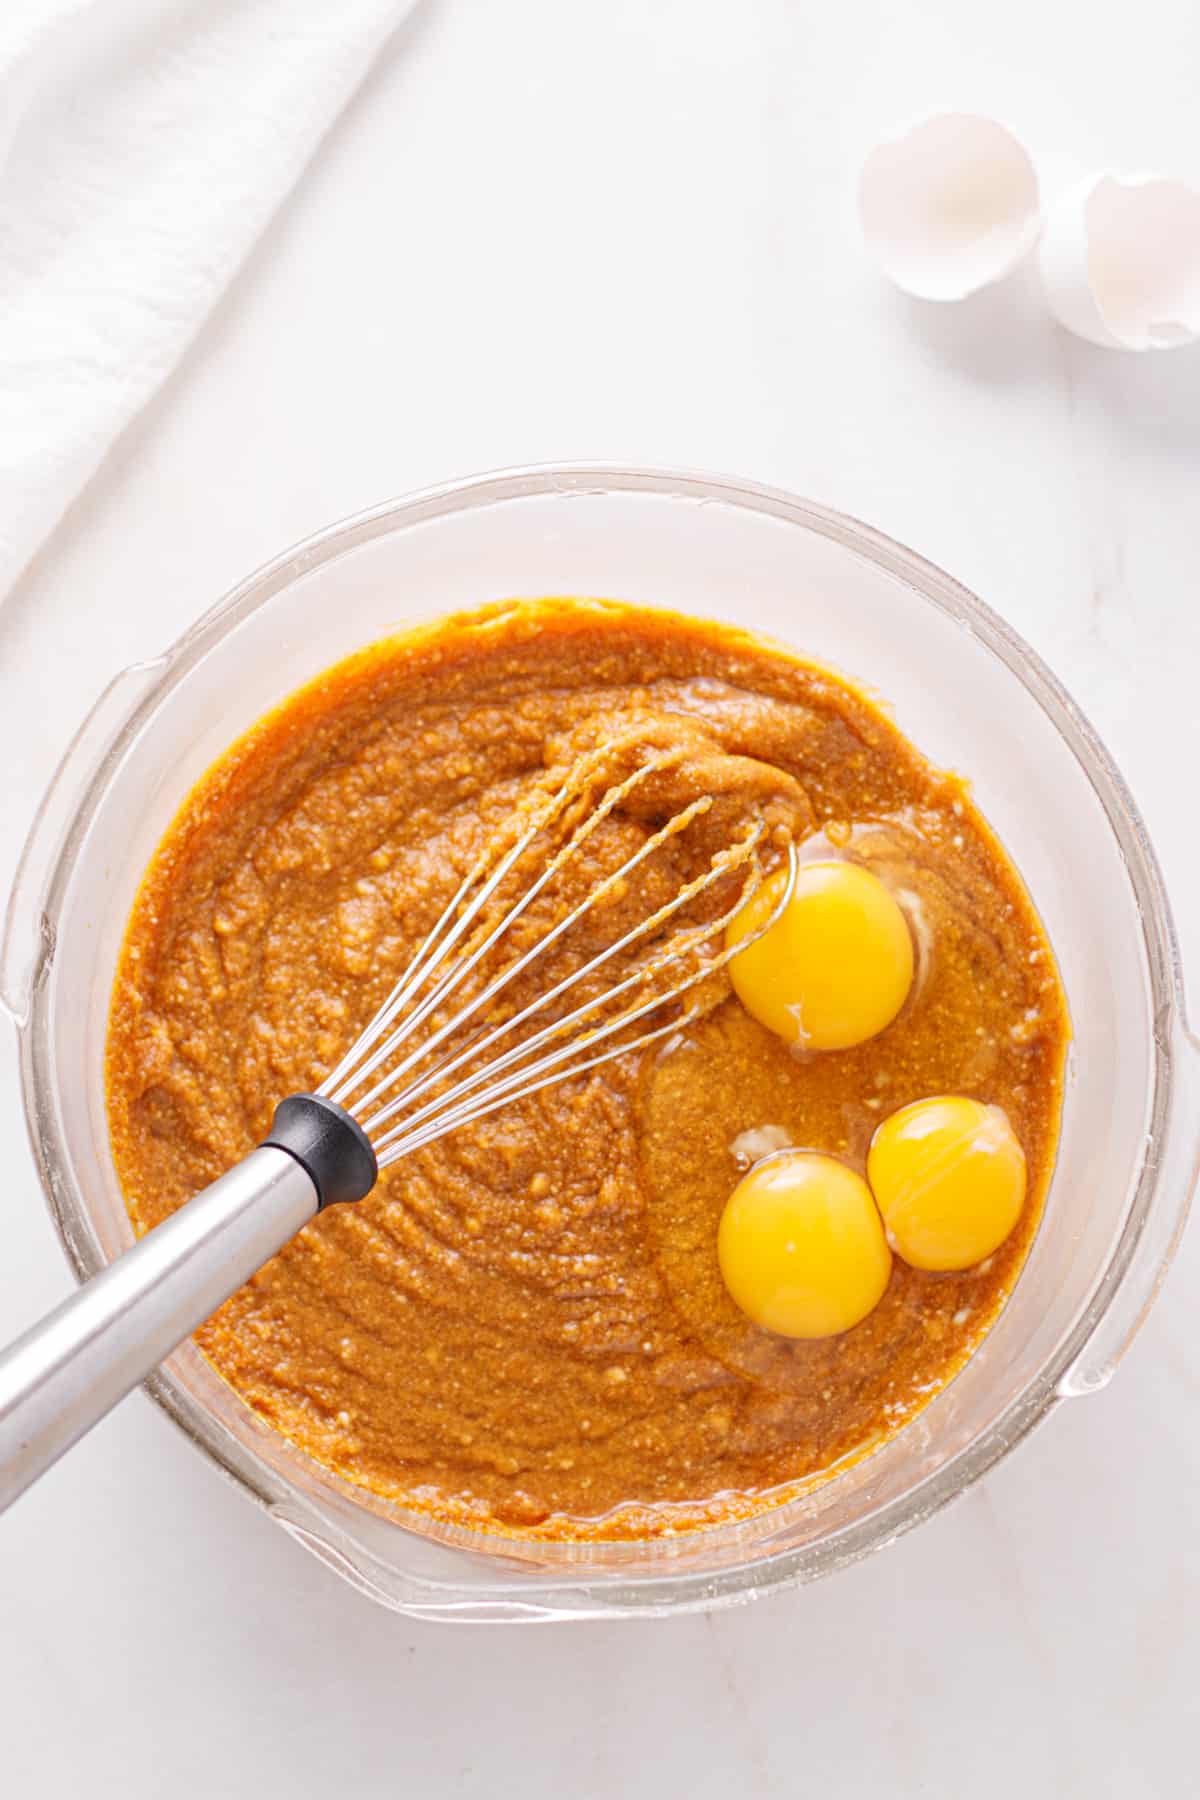 Pumpkin pie filling in a bowl with cracked eggs on top.